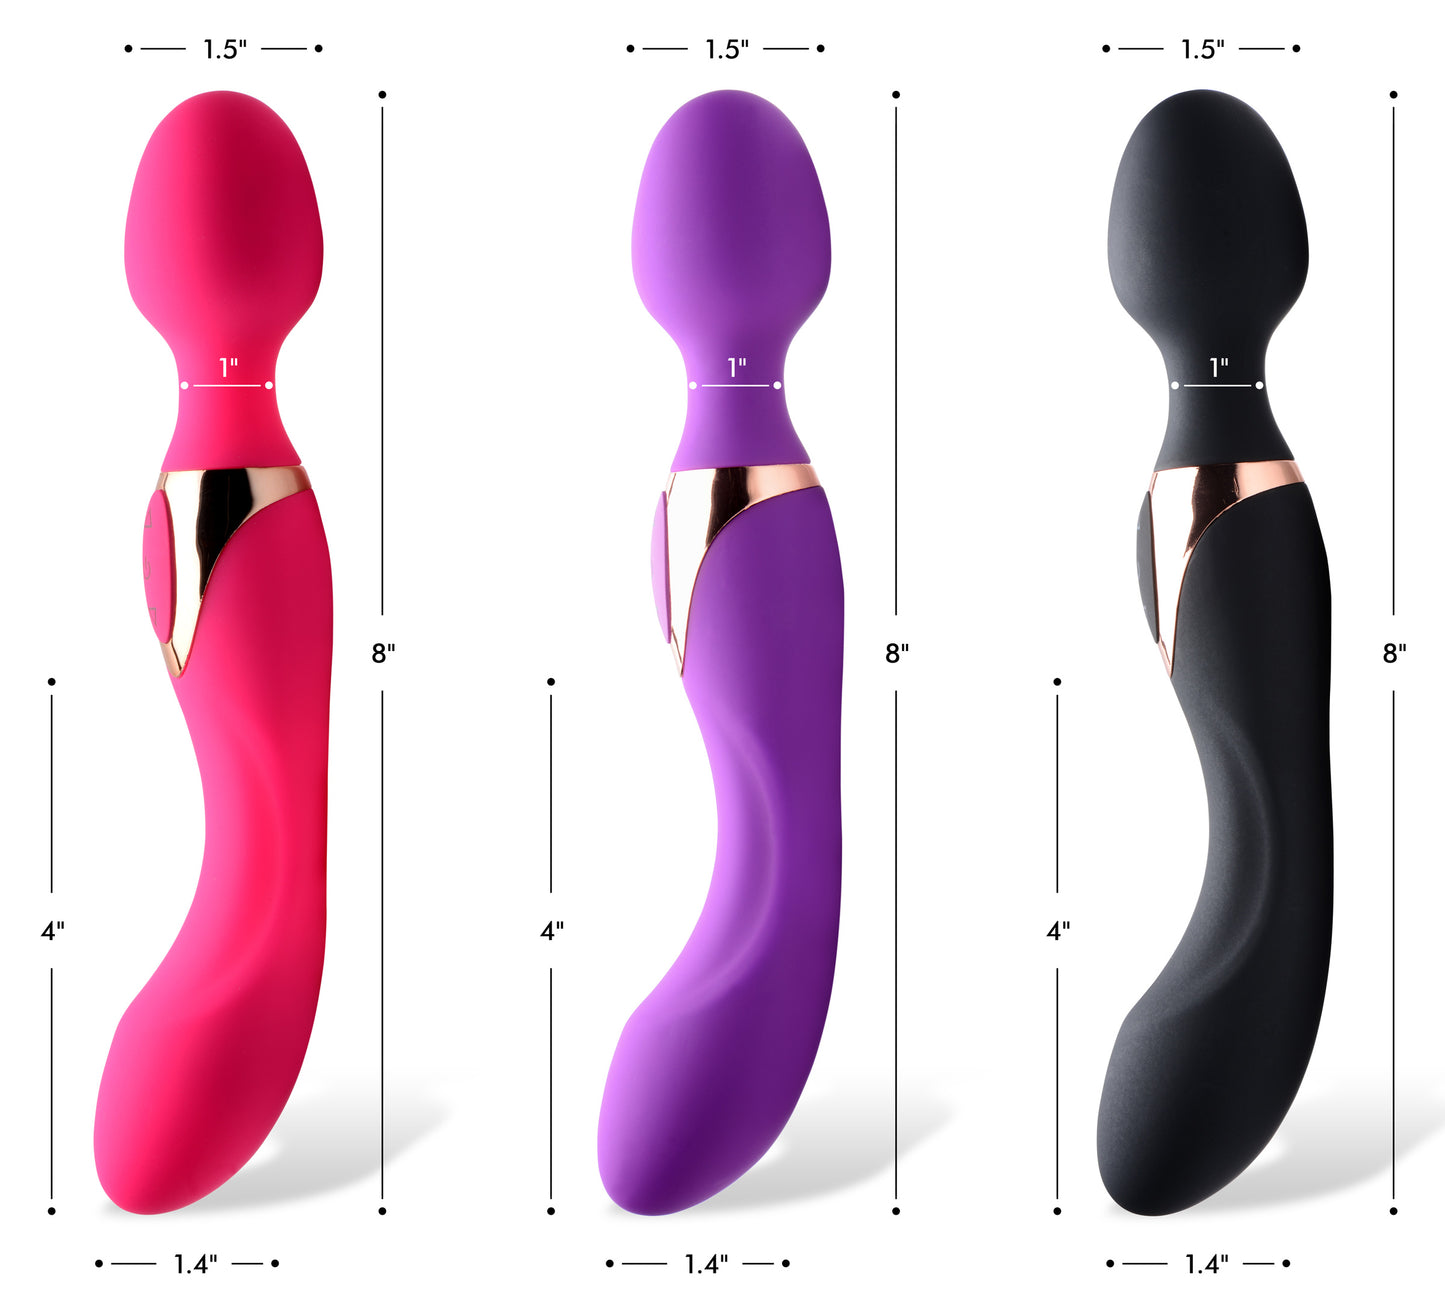 10x Dual Duchess 2-in-1 Silicone Massager - Purple